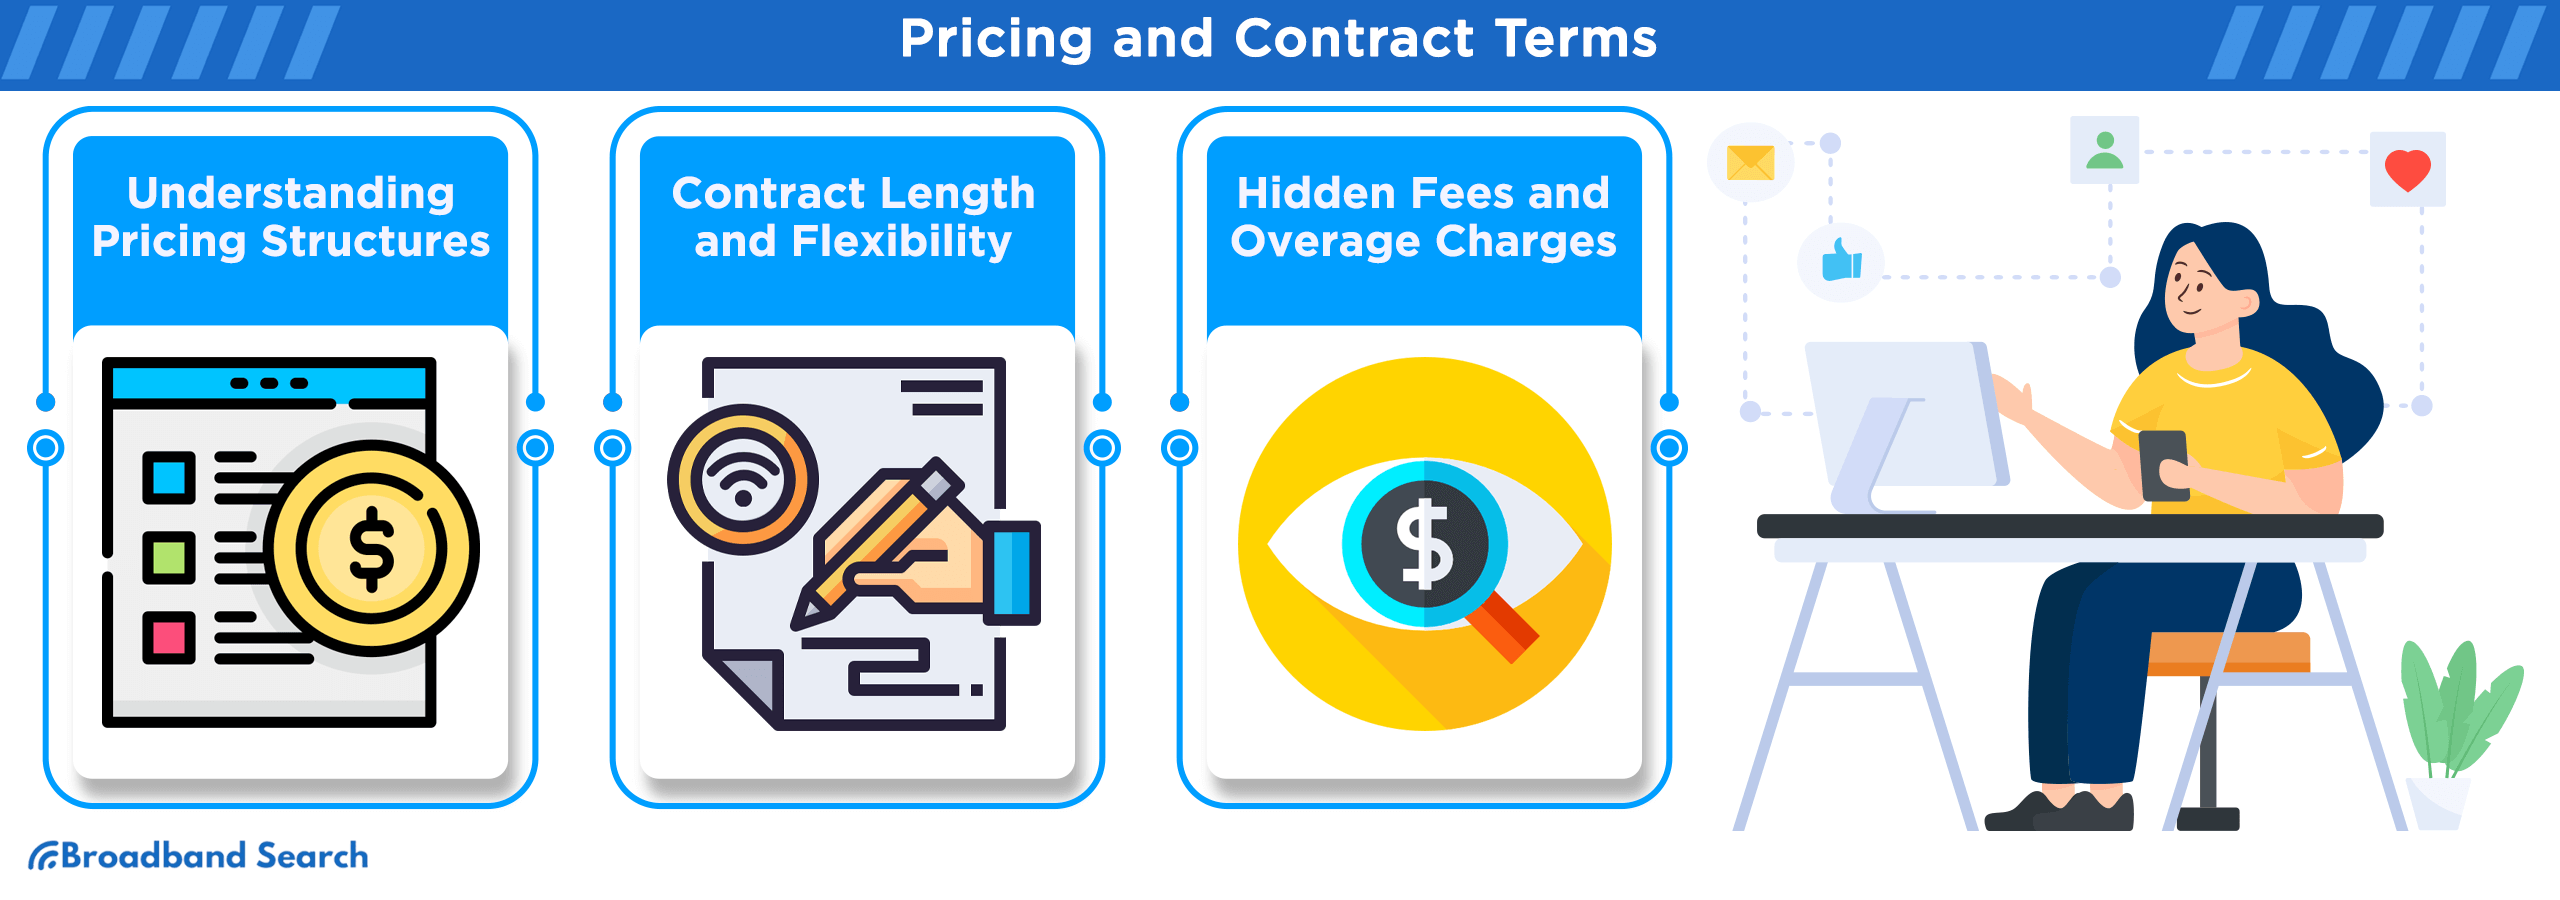 Pricing and contract terms to look out for